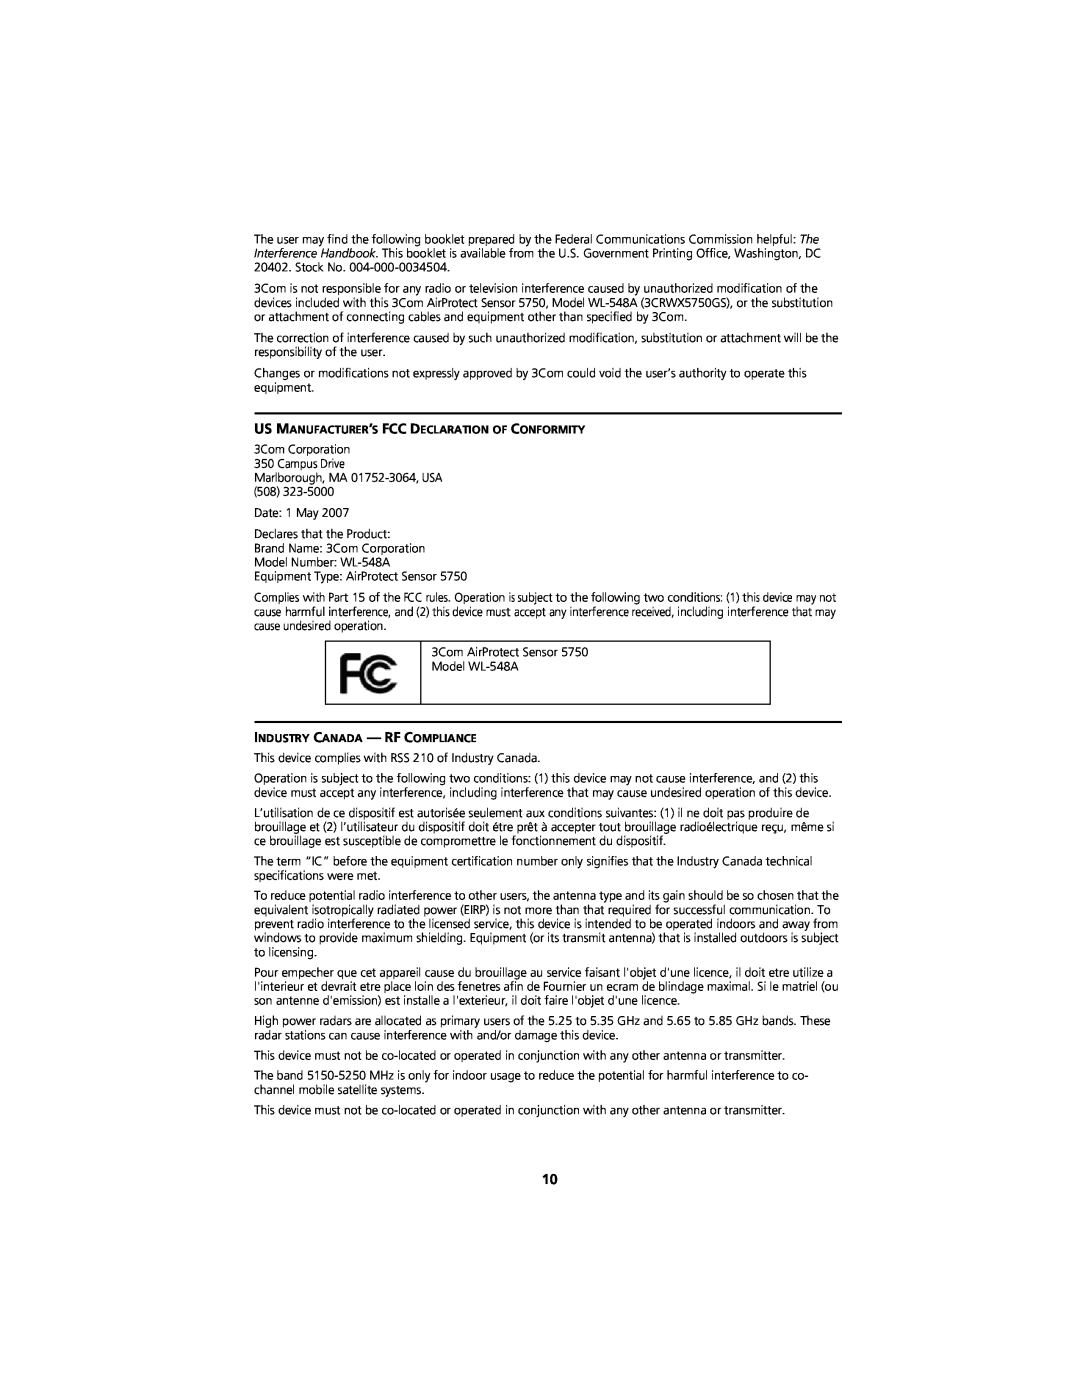 3Com WL-548A manual Us Manufacturer’S Fcc Declaration Of Conformity, Industry Canada - Rf Compliance 